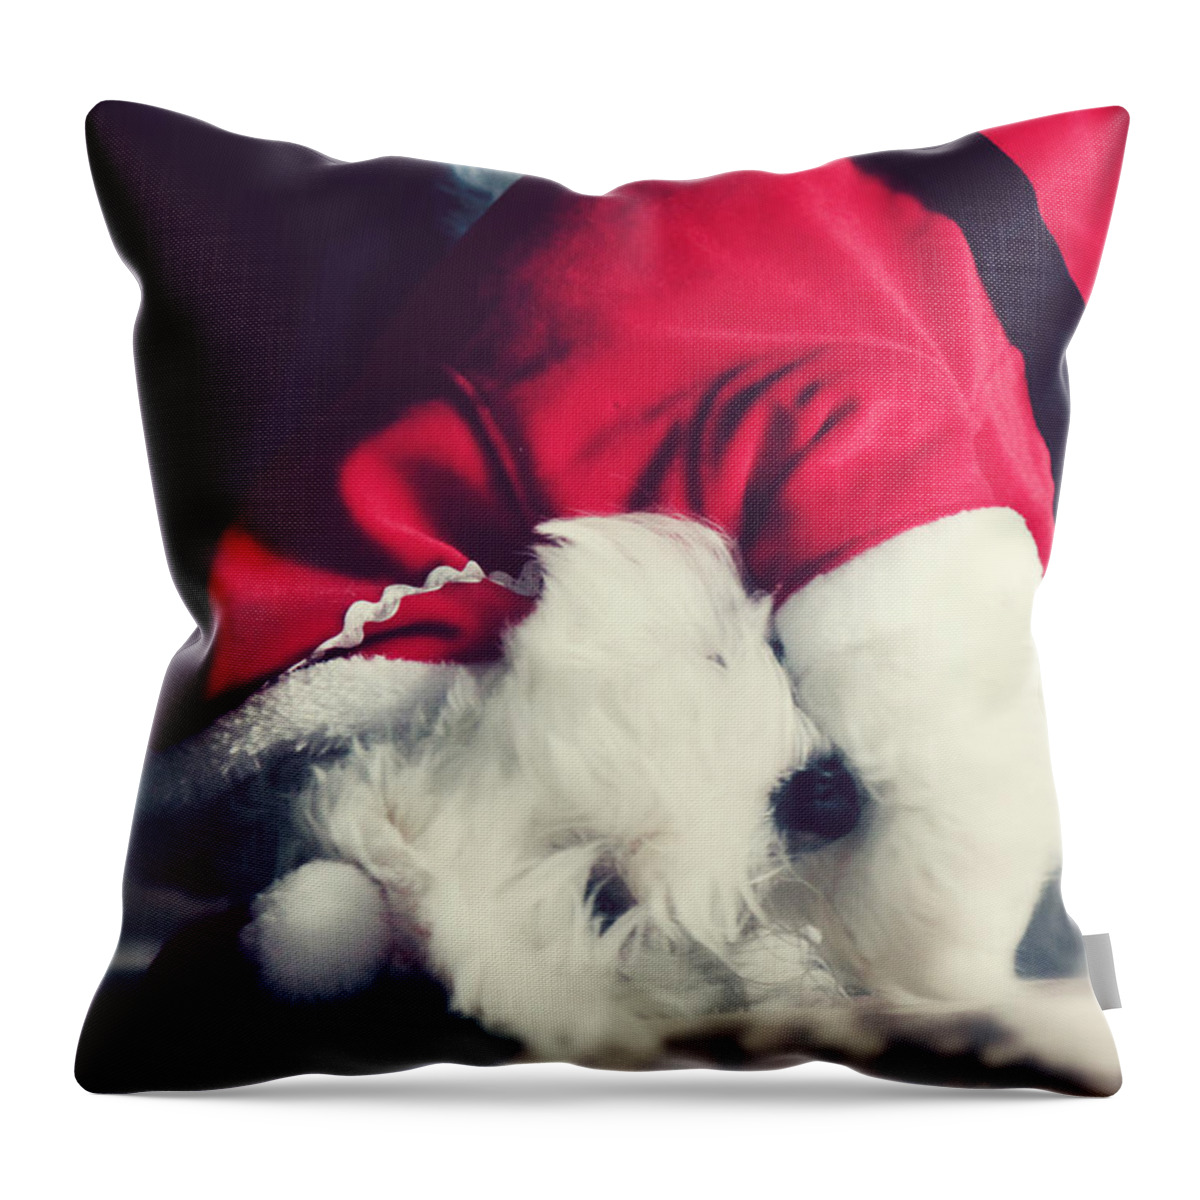 Dog Throw Pillow featuring the photograph Yoga Santa by Melanie Lankford Photography